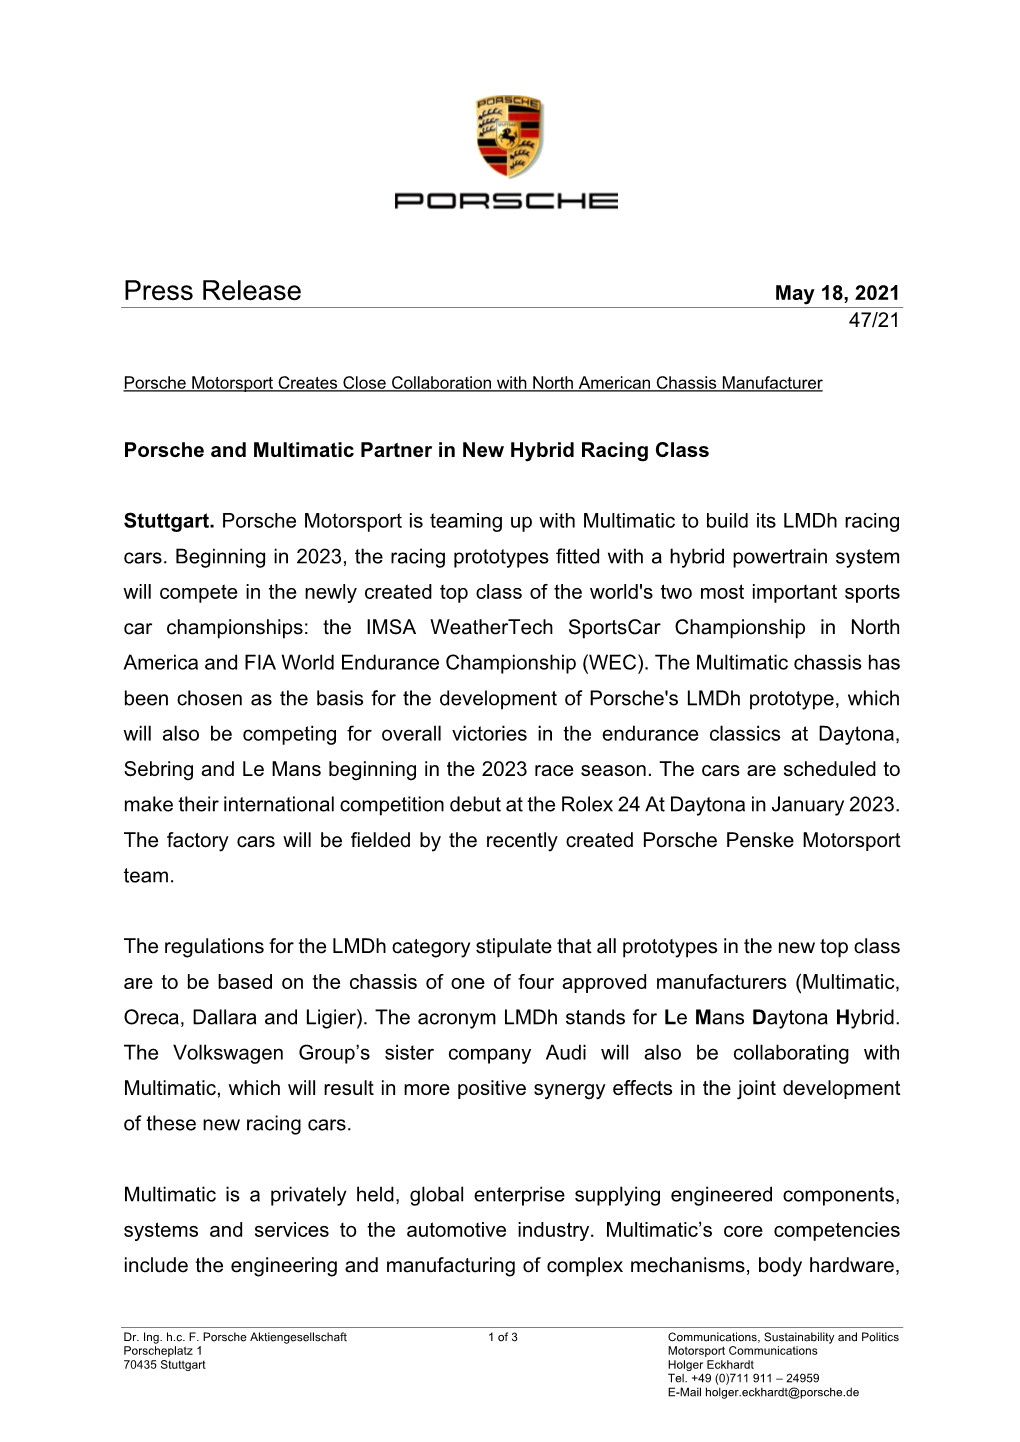 Press Release May 18, 2021 47/21